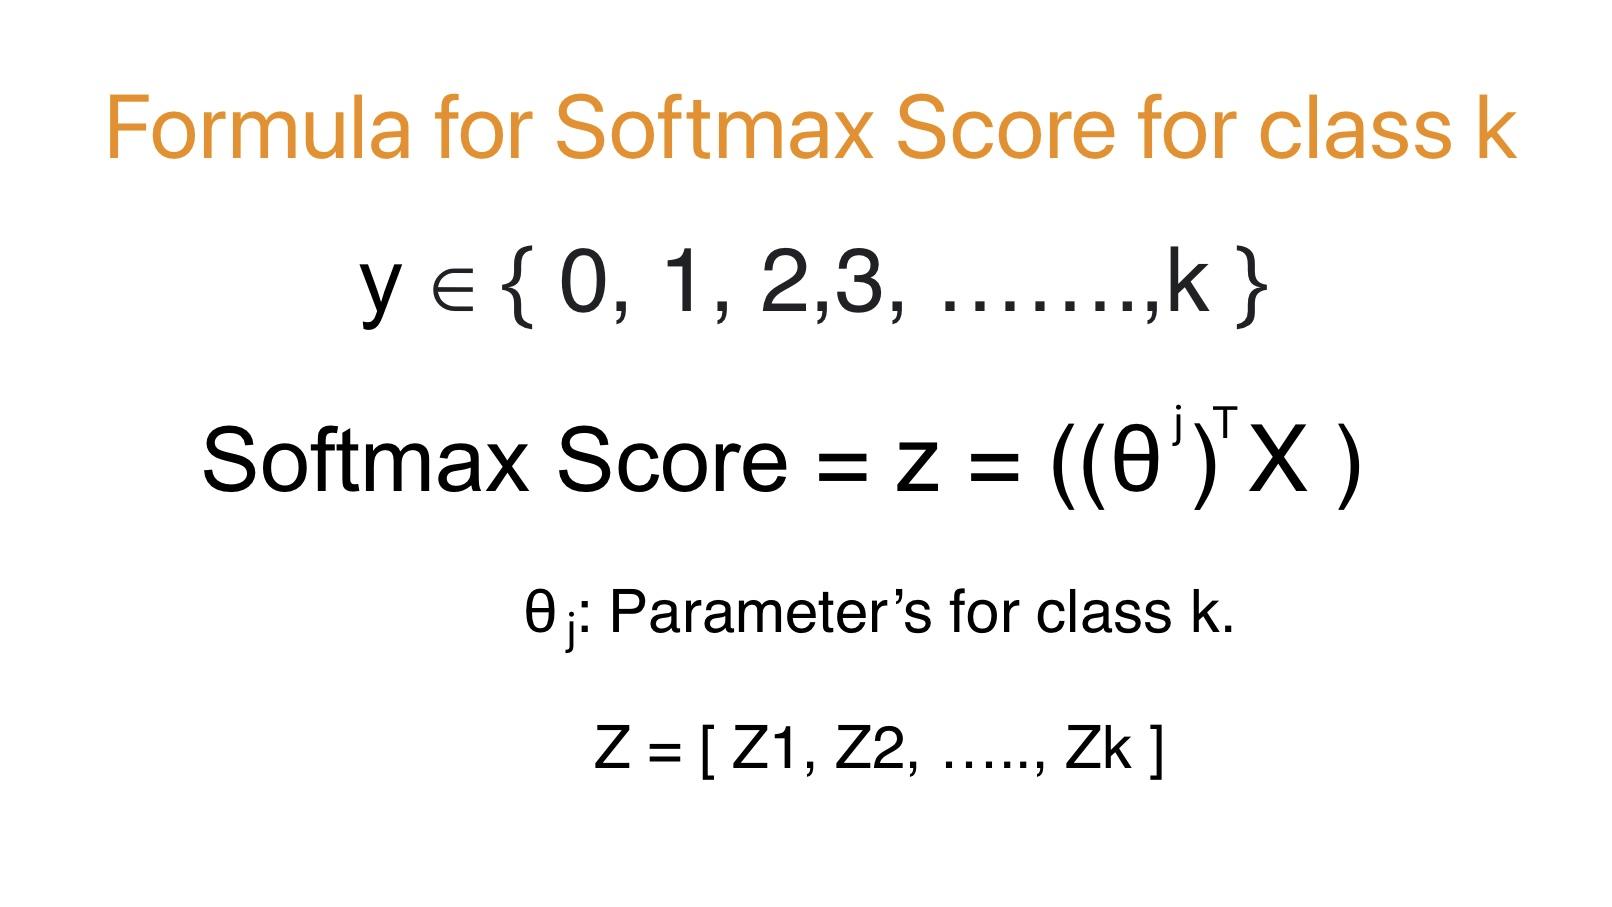 This image shows the formula for Softmax score for softmax regression in machine learning.